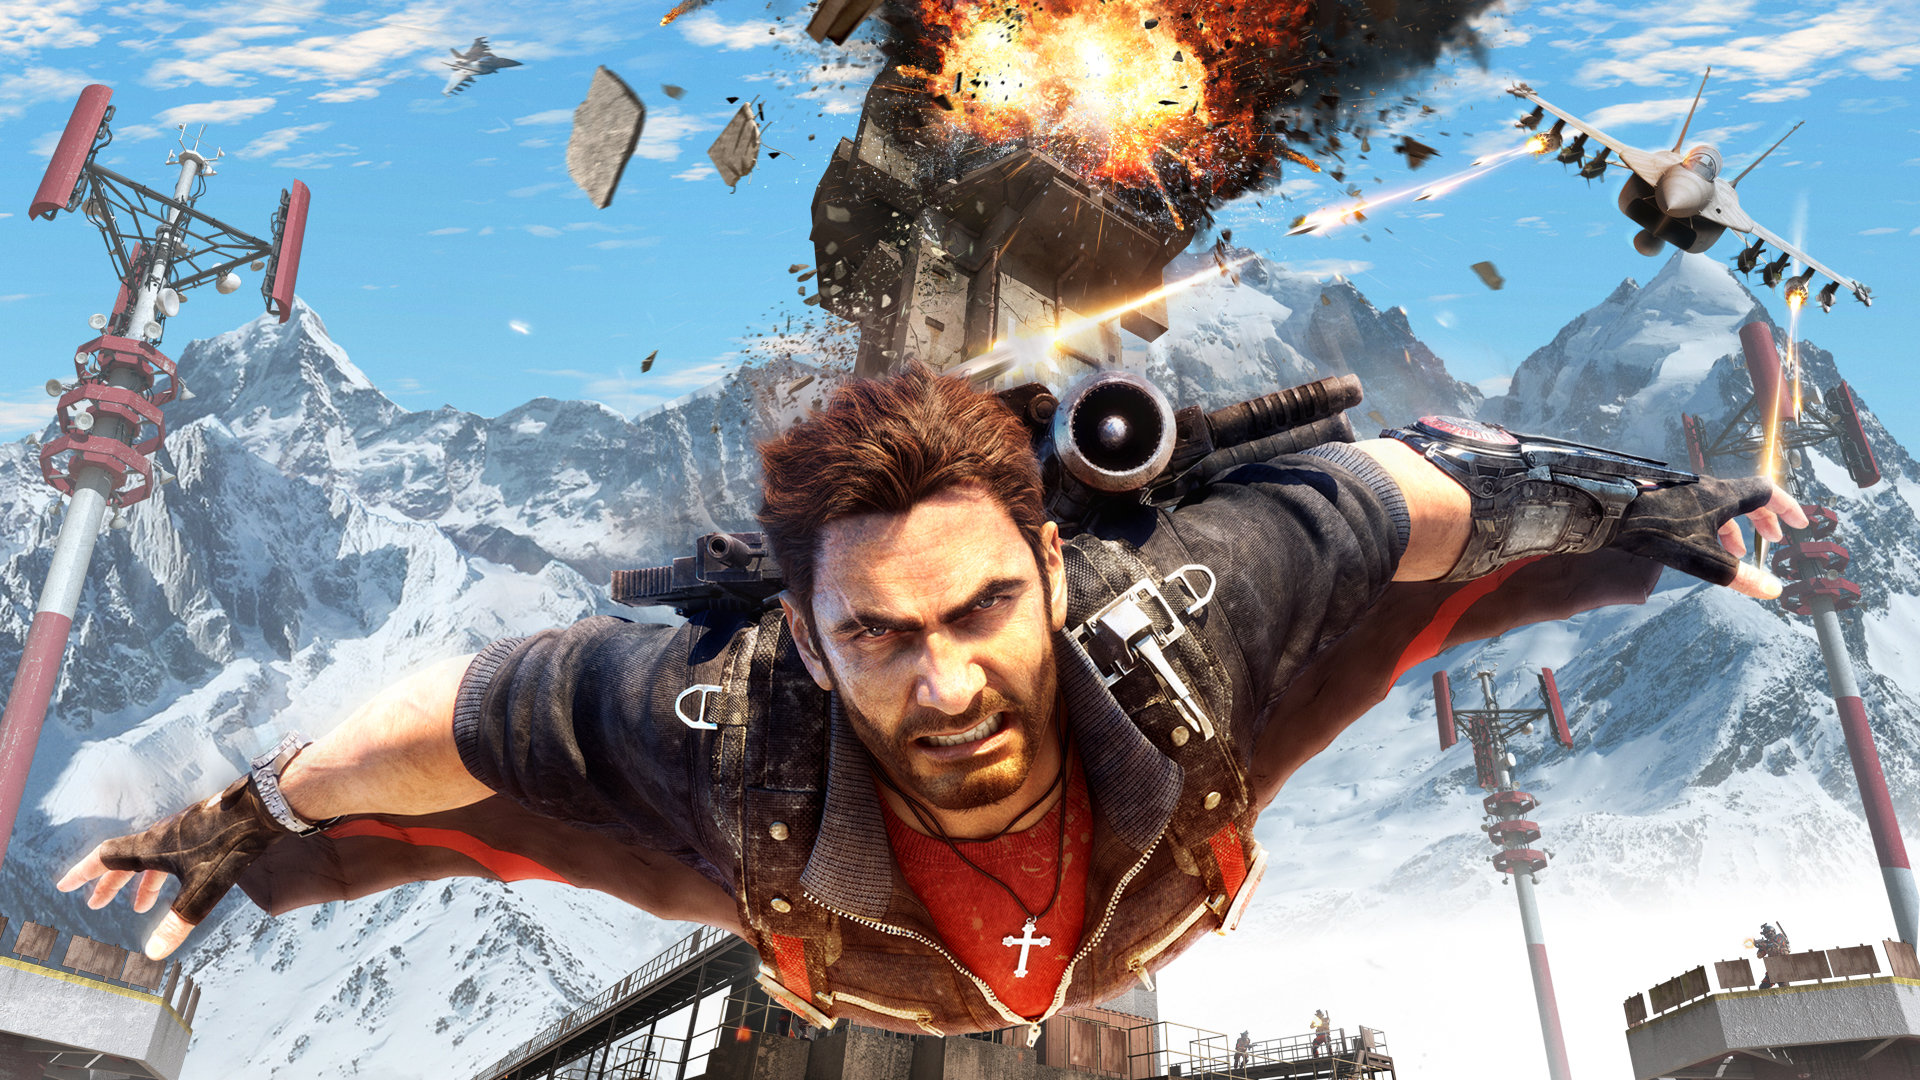 Download 1080p Just Cause 3 PC wallpaper ID:137938 for free